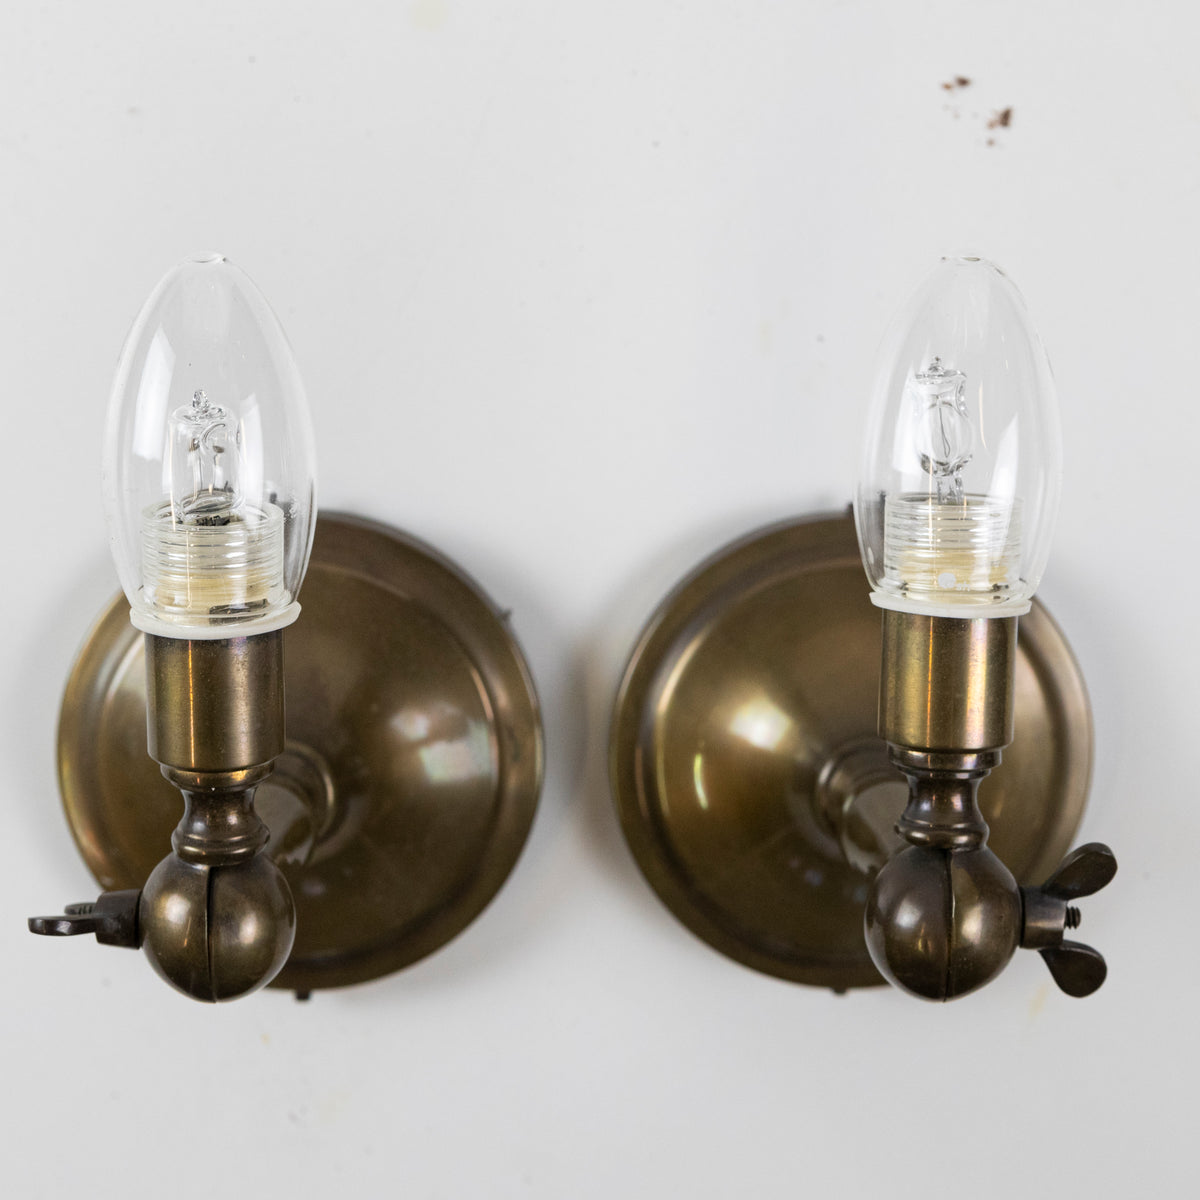 Reclaimed Pair of Besselink &amp; Jones Wall Lights | The Architectural Forum